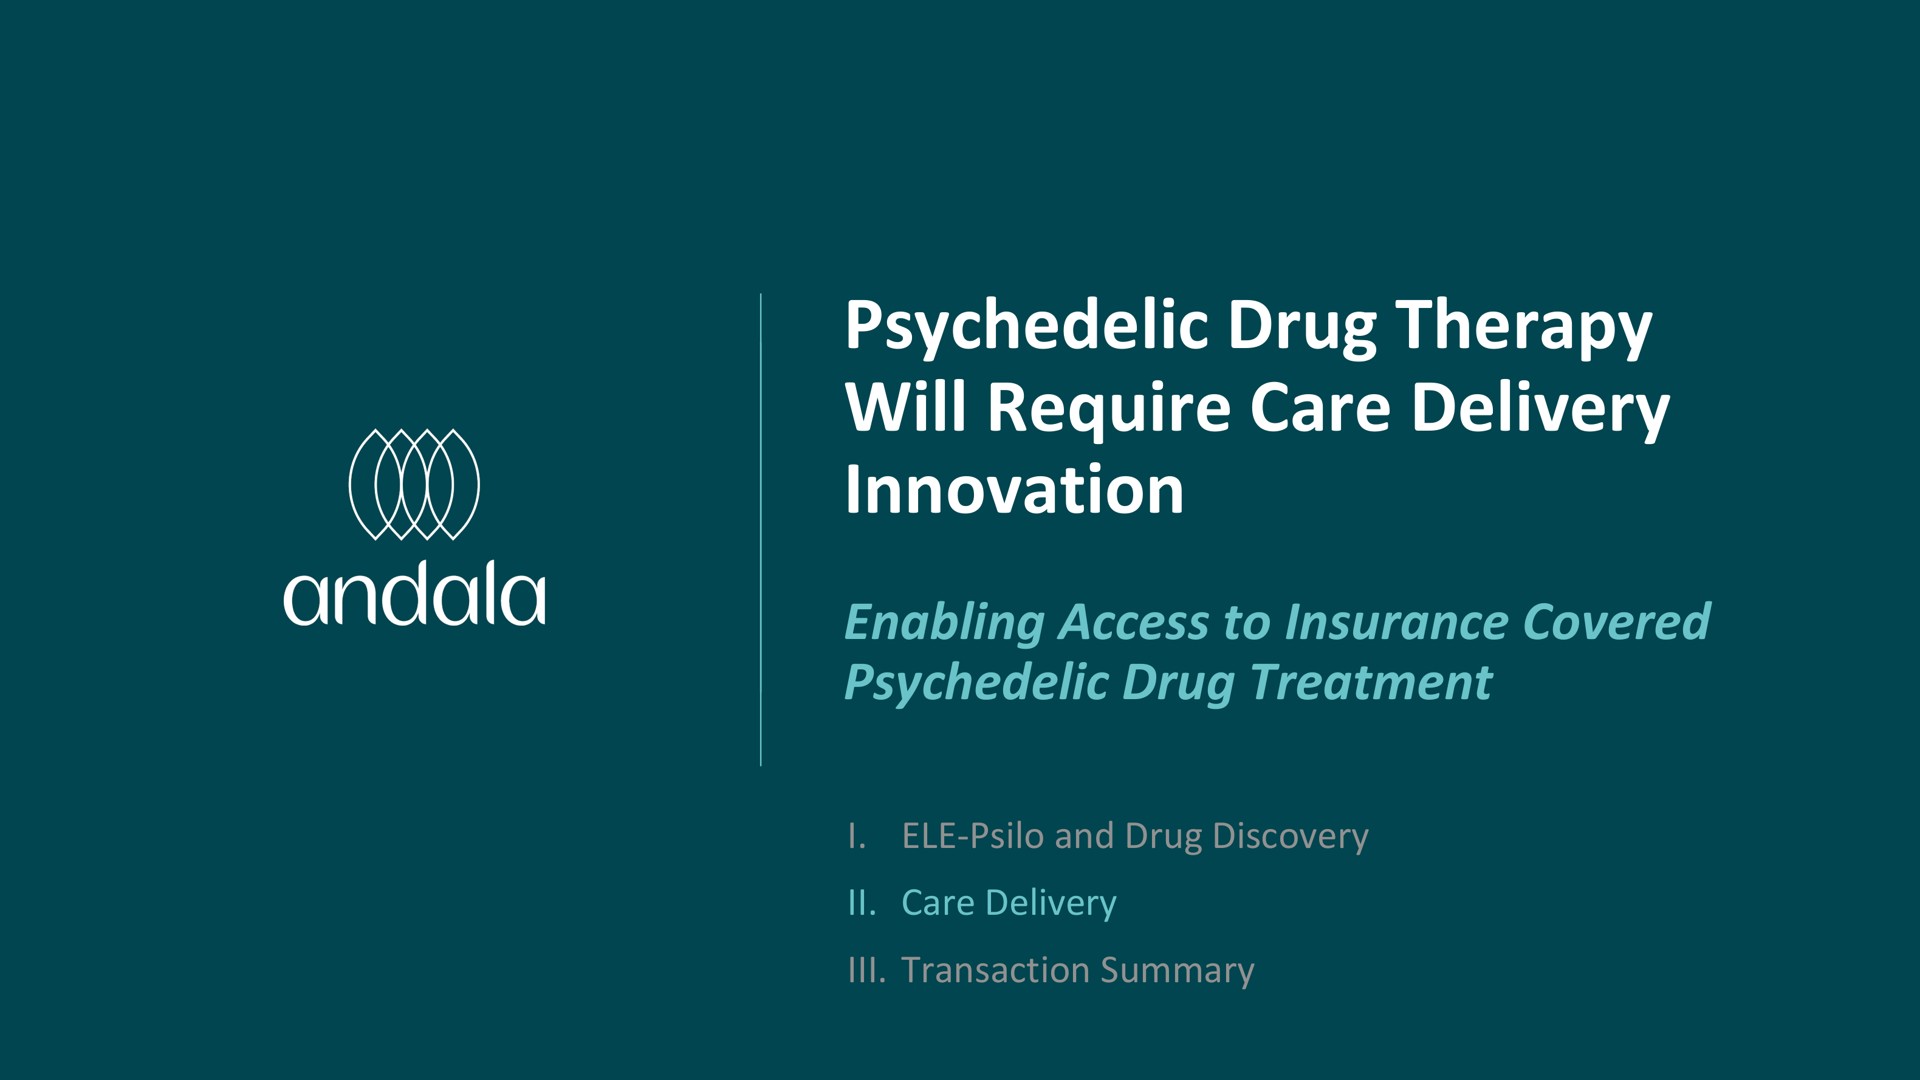 drug therapy will require care delivery innovation enabling access to insurance covered drug treatment i | Eleusis